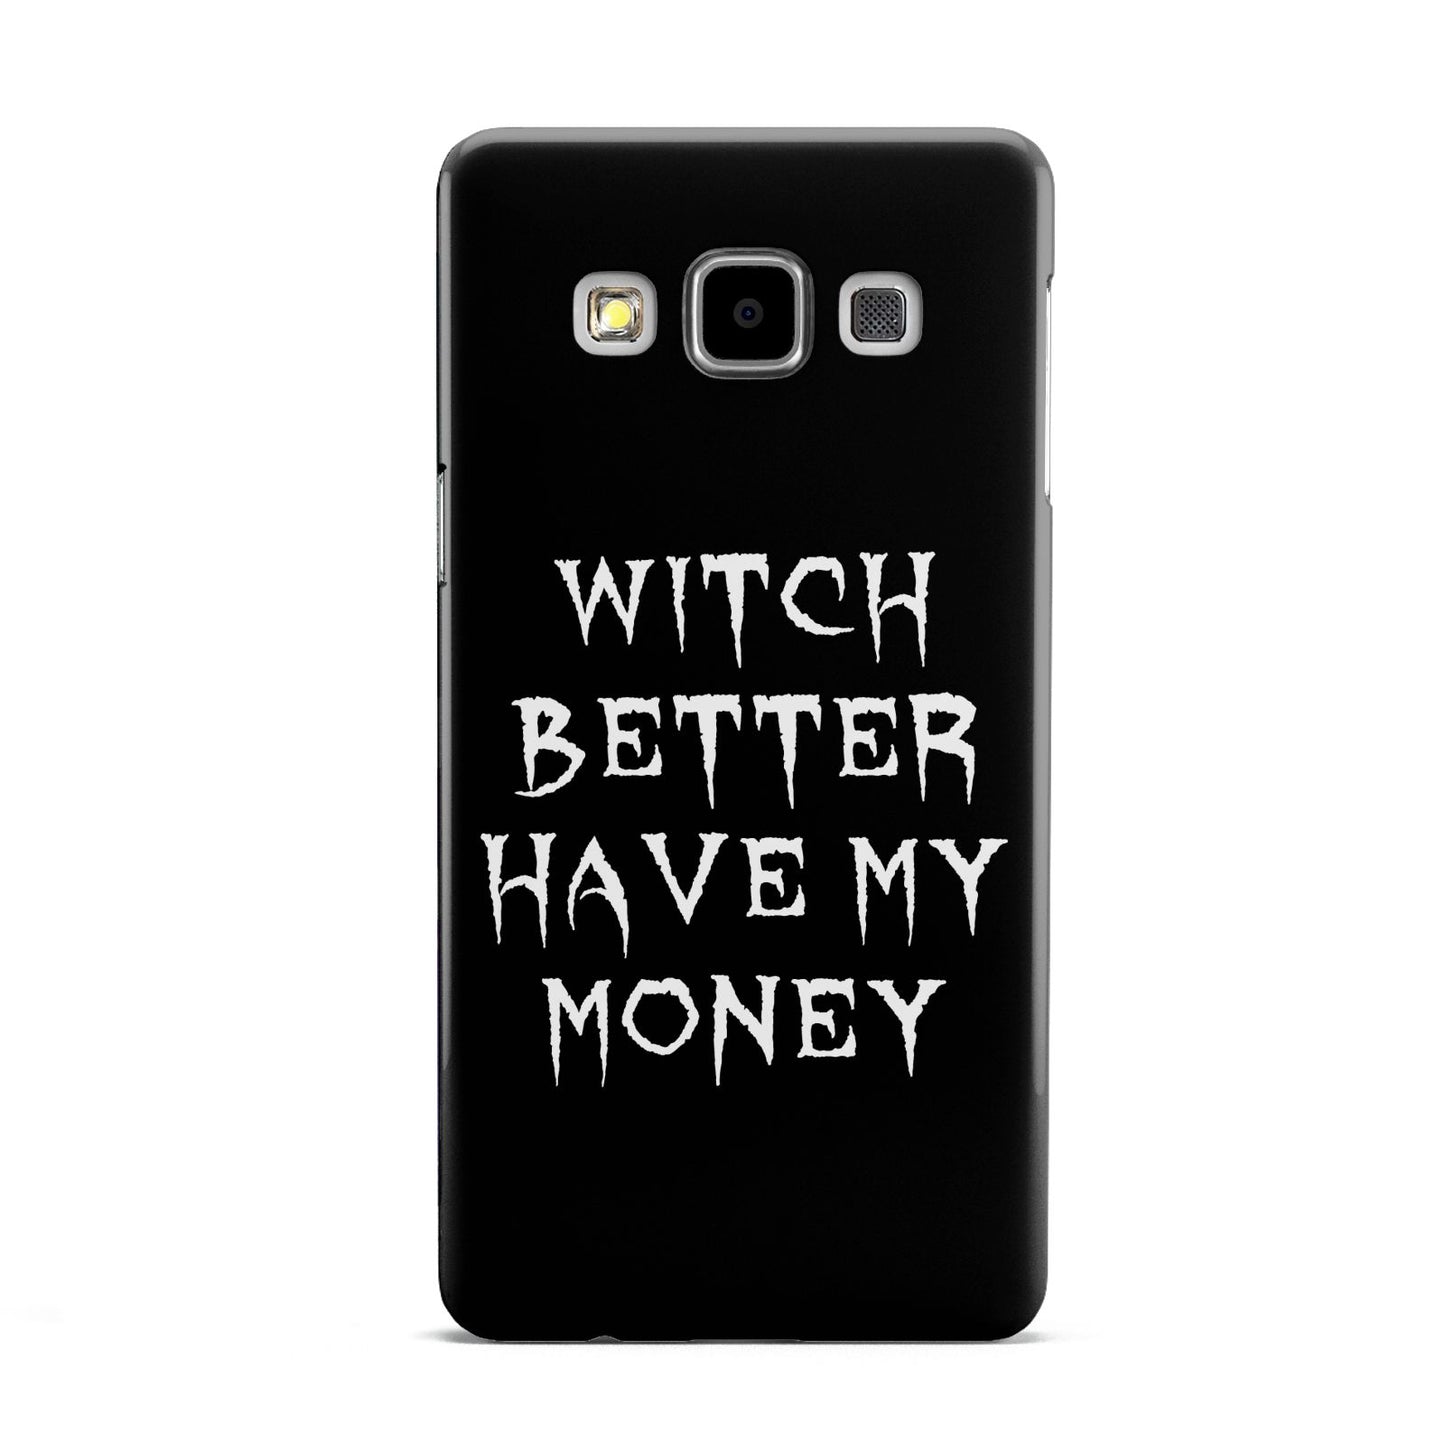 Witch Better Have My Money Samsung Galaxy A5 Case